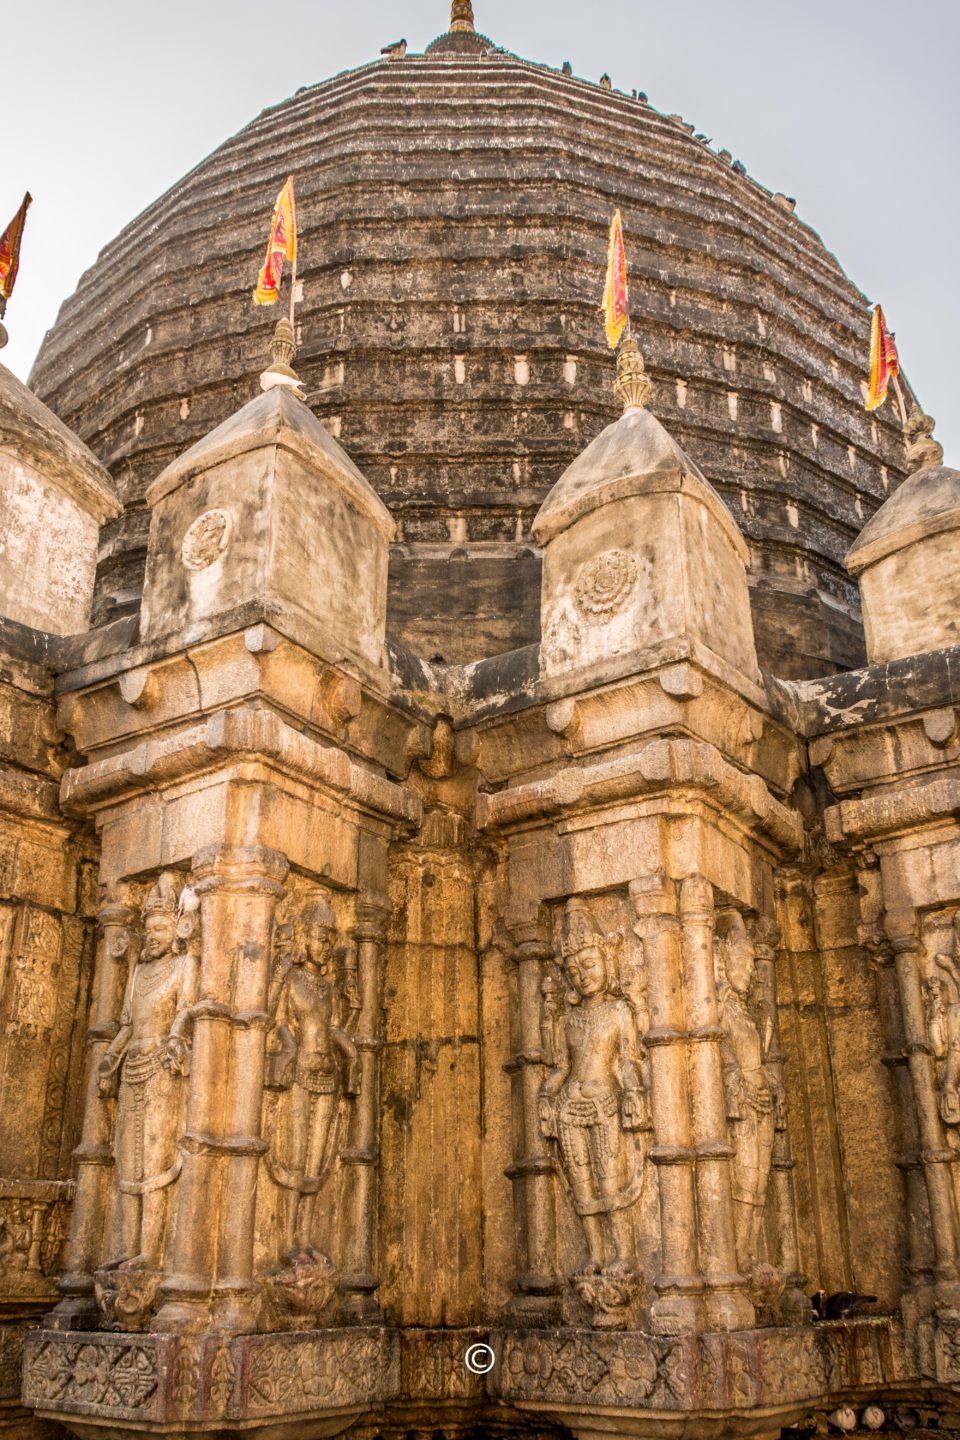 Incarnations of Shiva depicted on the exterior of the temple